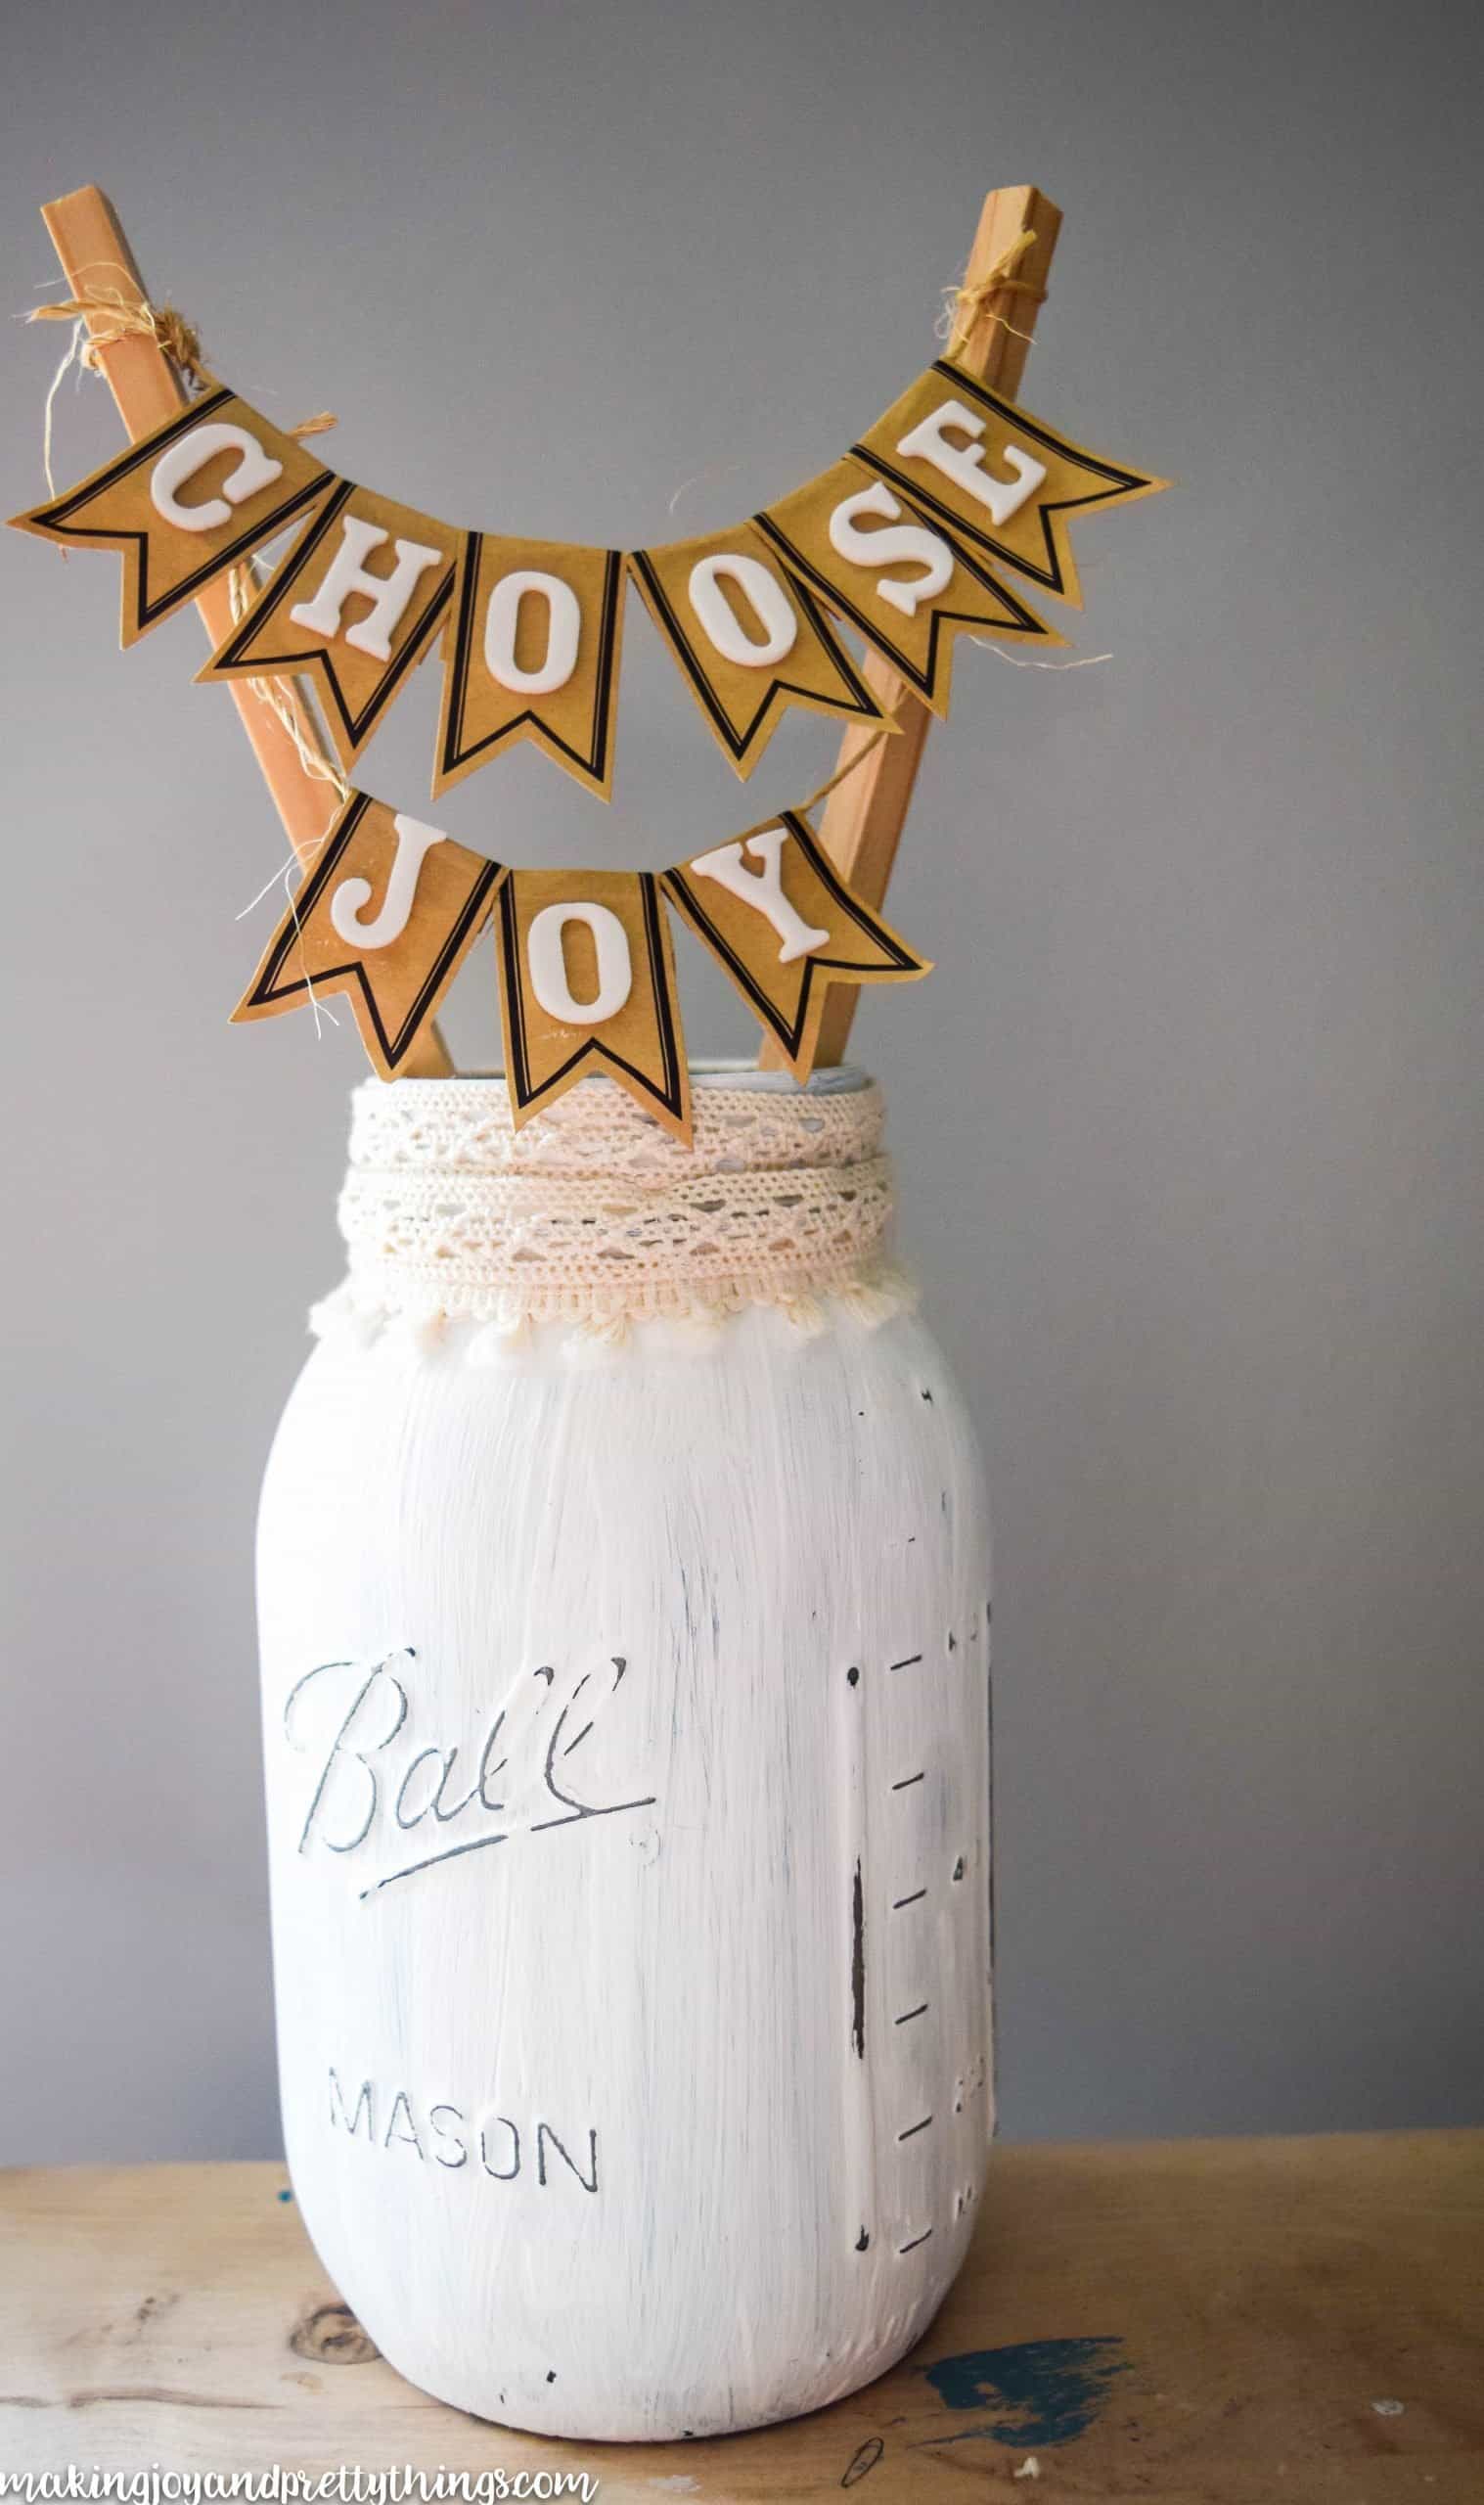 A white painted mason jar with a lace trim around the top. Two thin sticks hold a small paper banner that reads "choose joy"